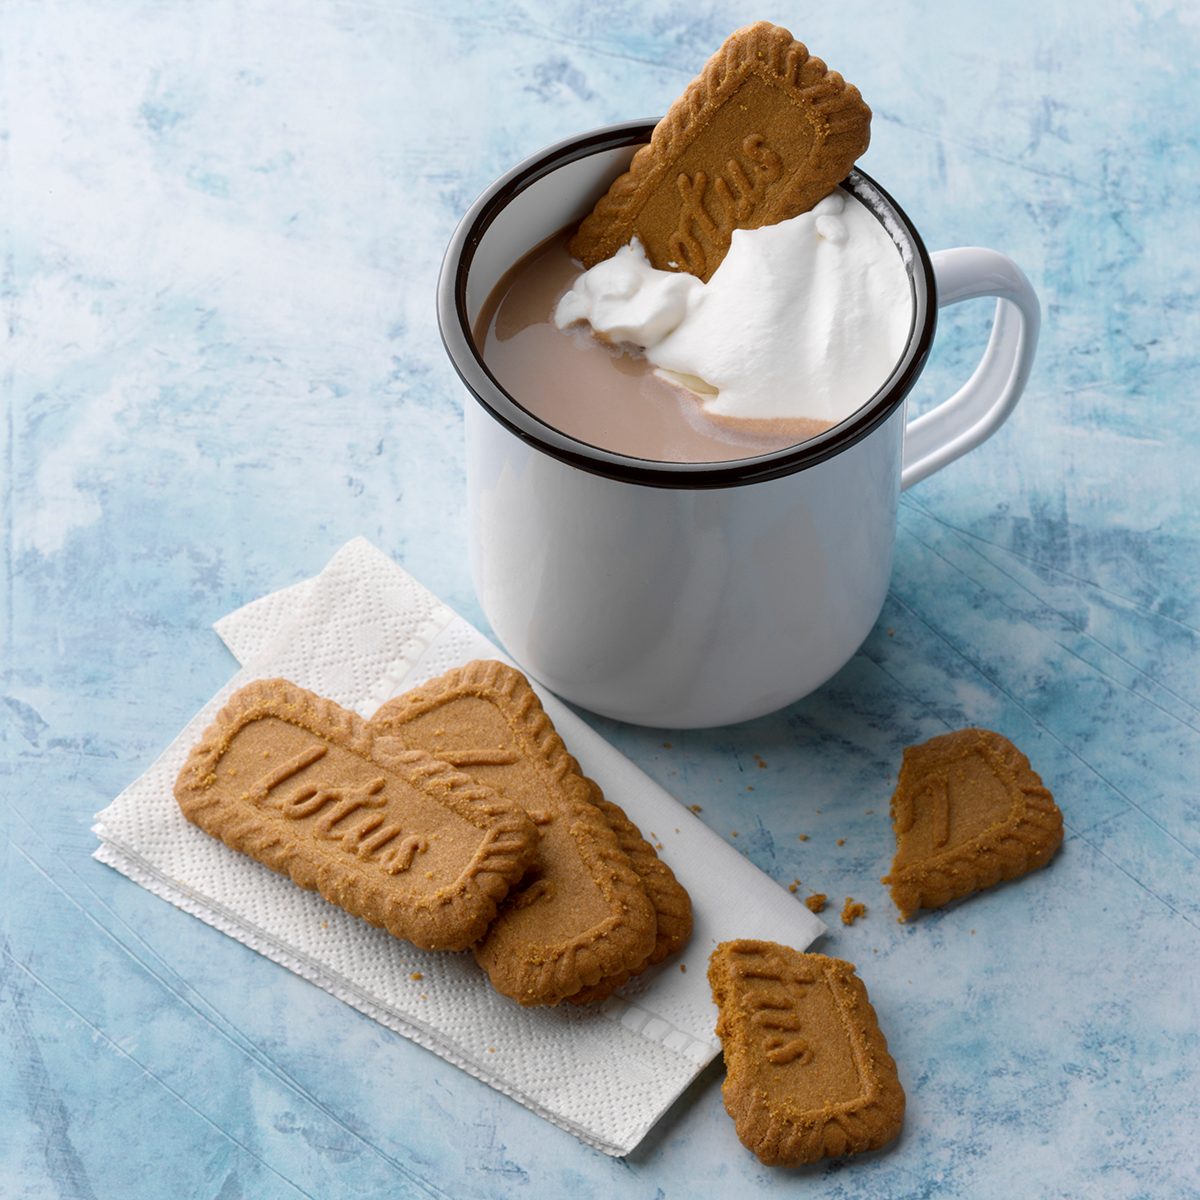 15 Things To Put In Hot Chocolate Besides Mini Marshmallows Laptrinhx News